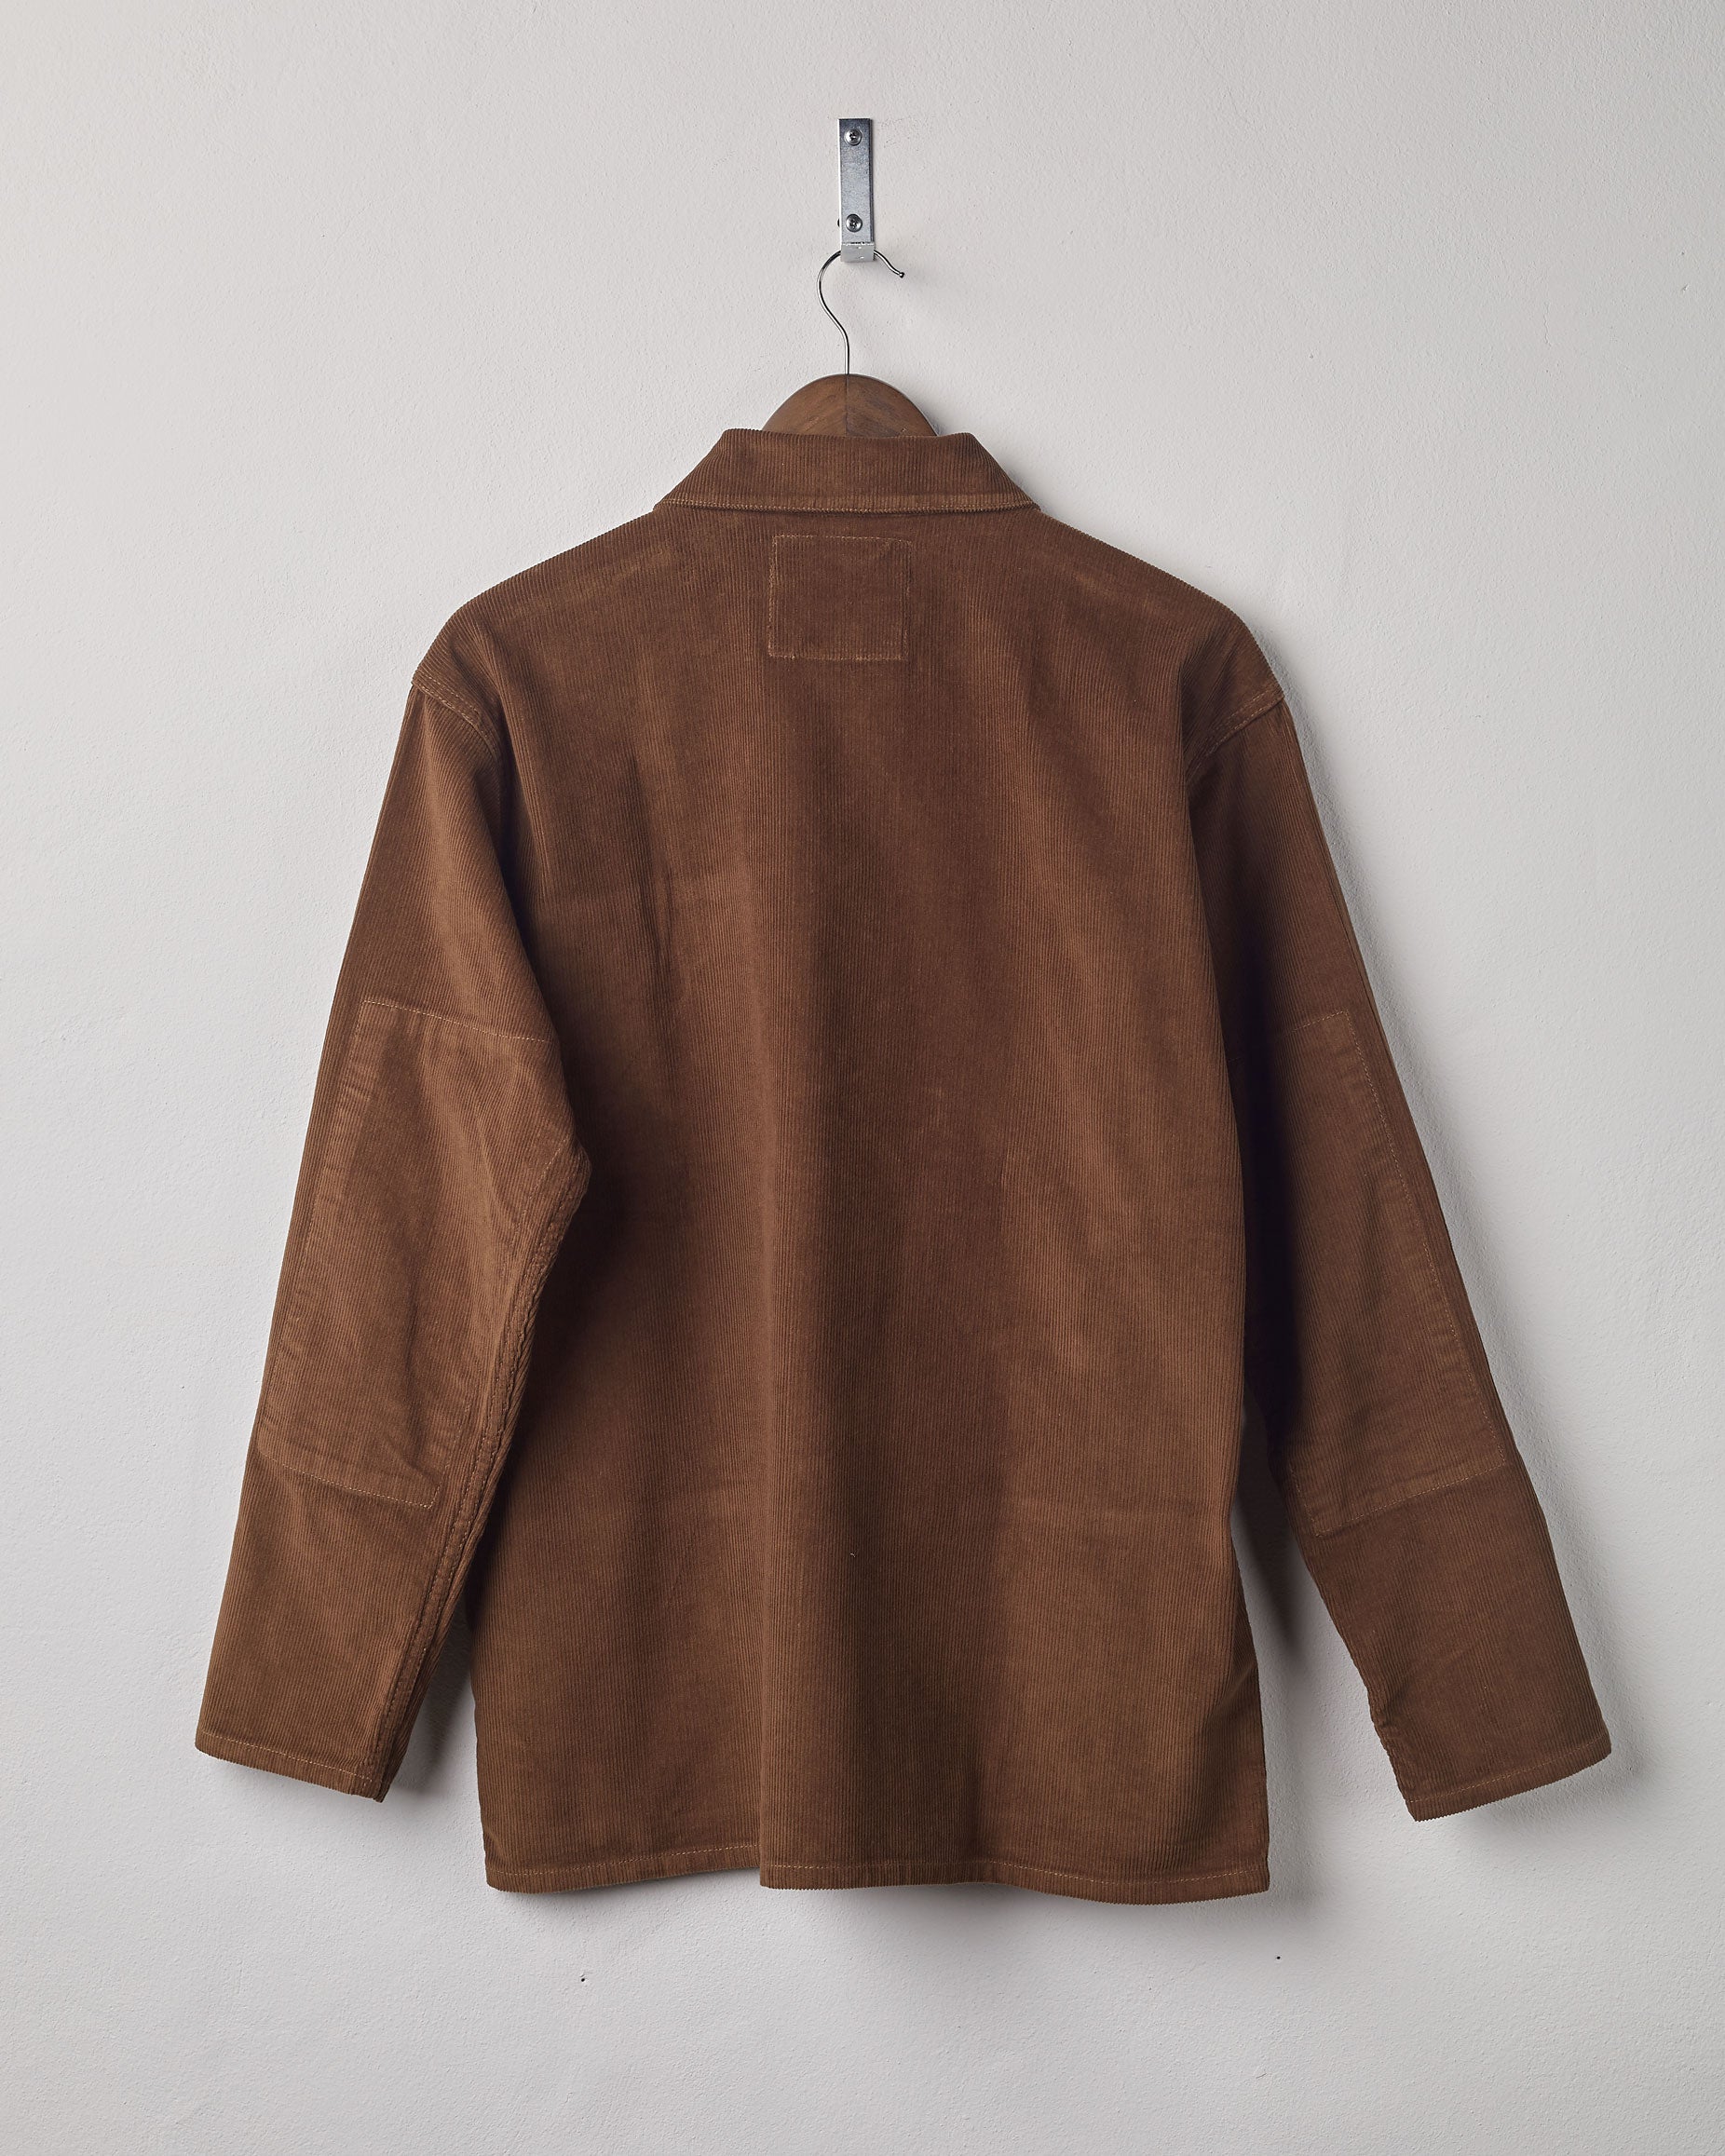 Full-length rear view of #3001, brown-coloured corduroy over shirt with reinforced elbows.